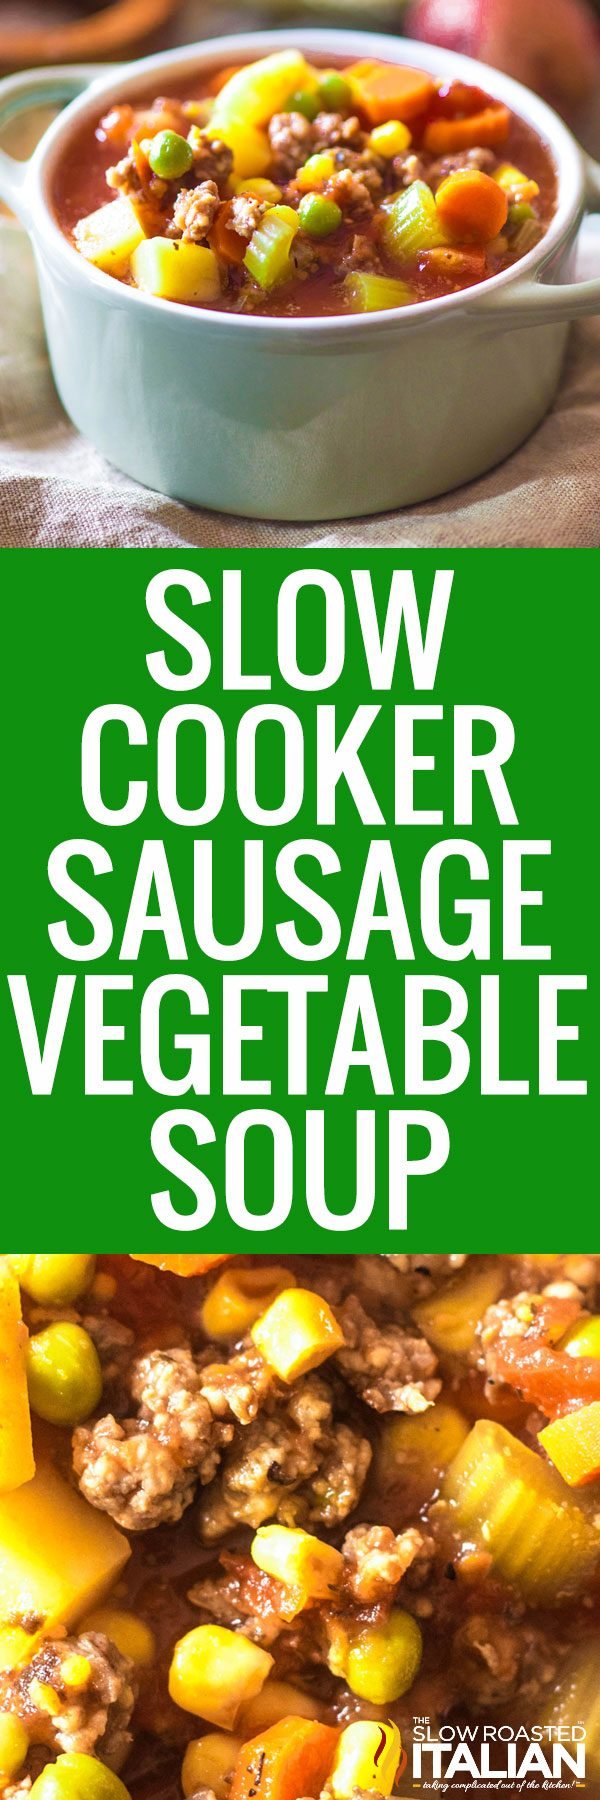 slow cooker sausage vegetable soup -pin